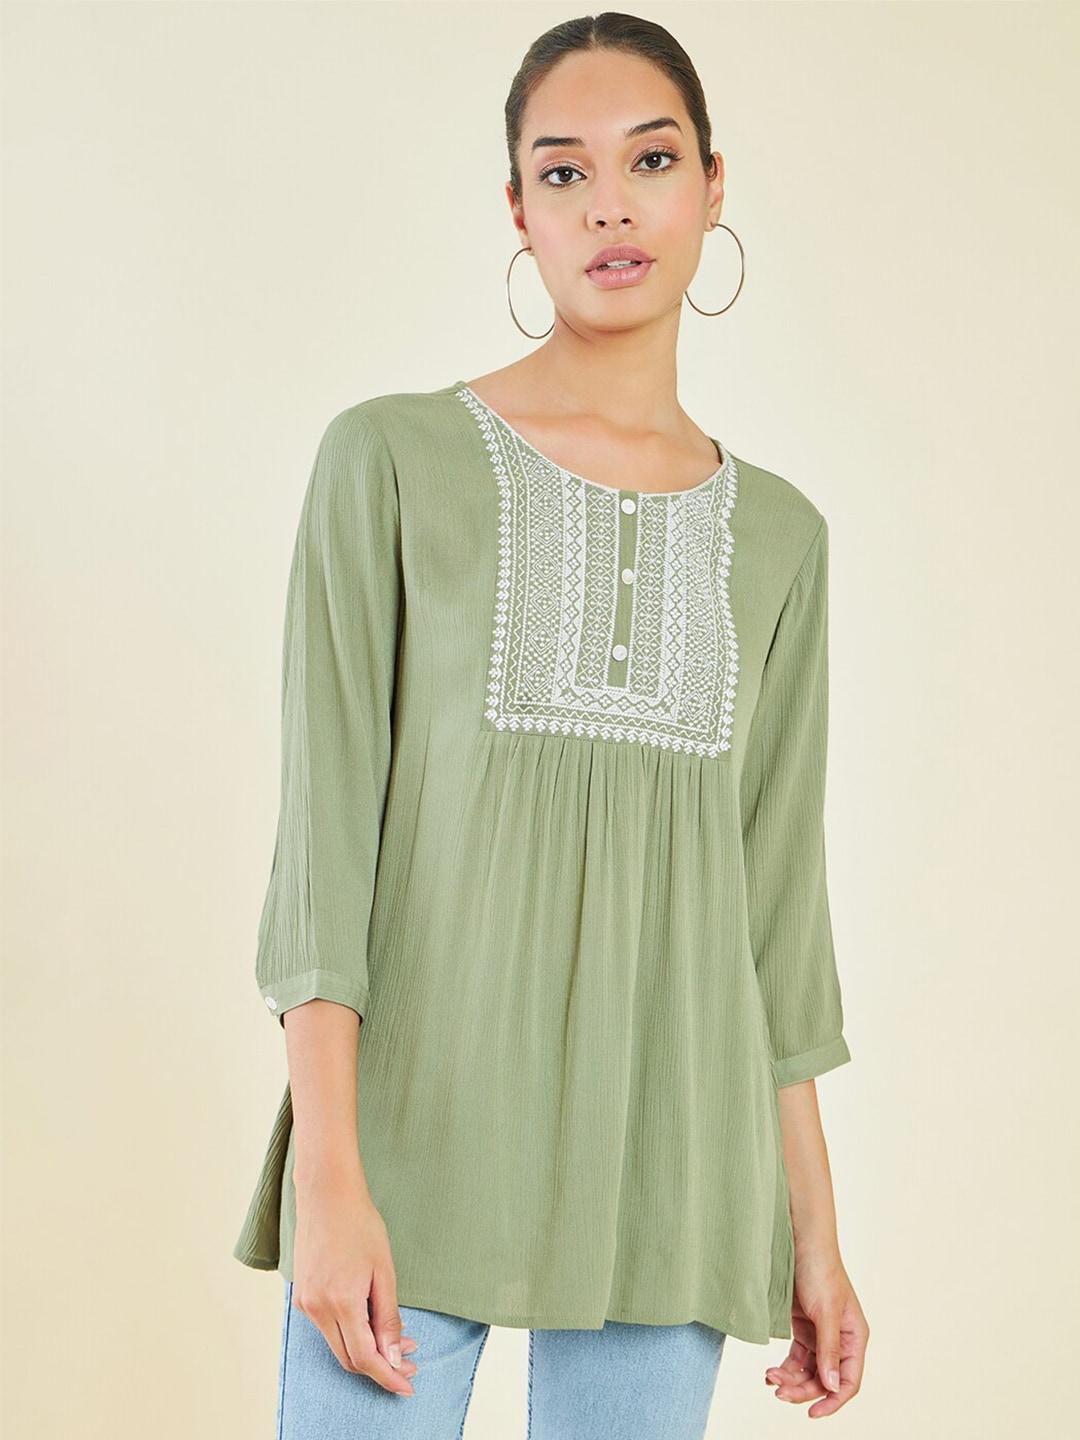 Soch Green & White Embroidered Ethnic Tunic